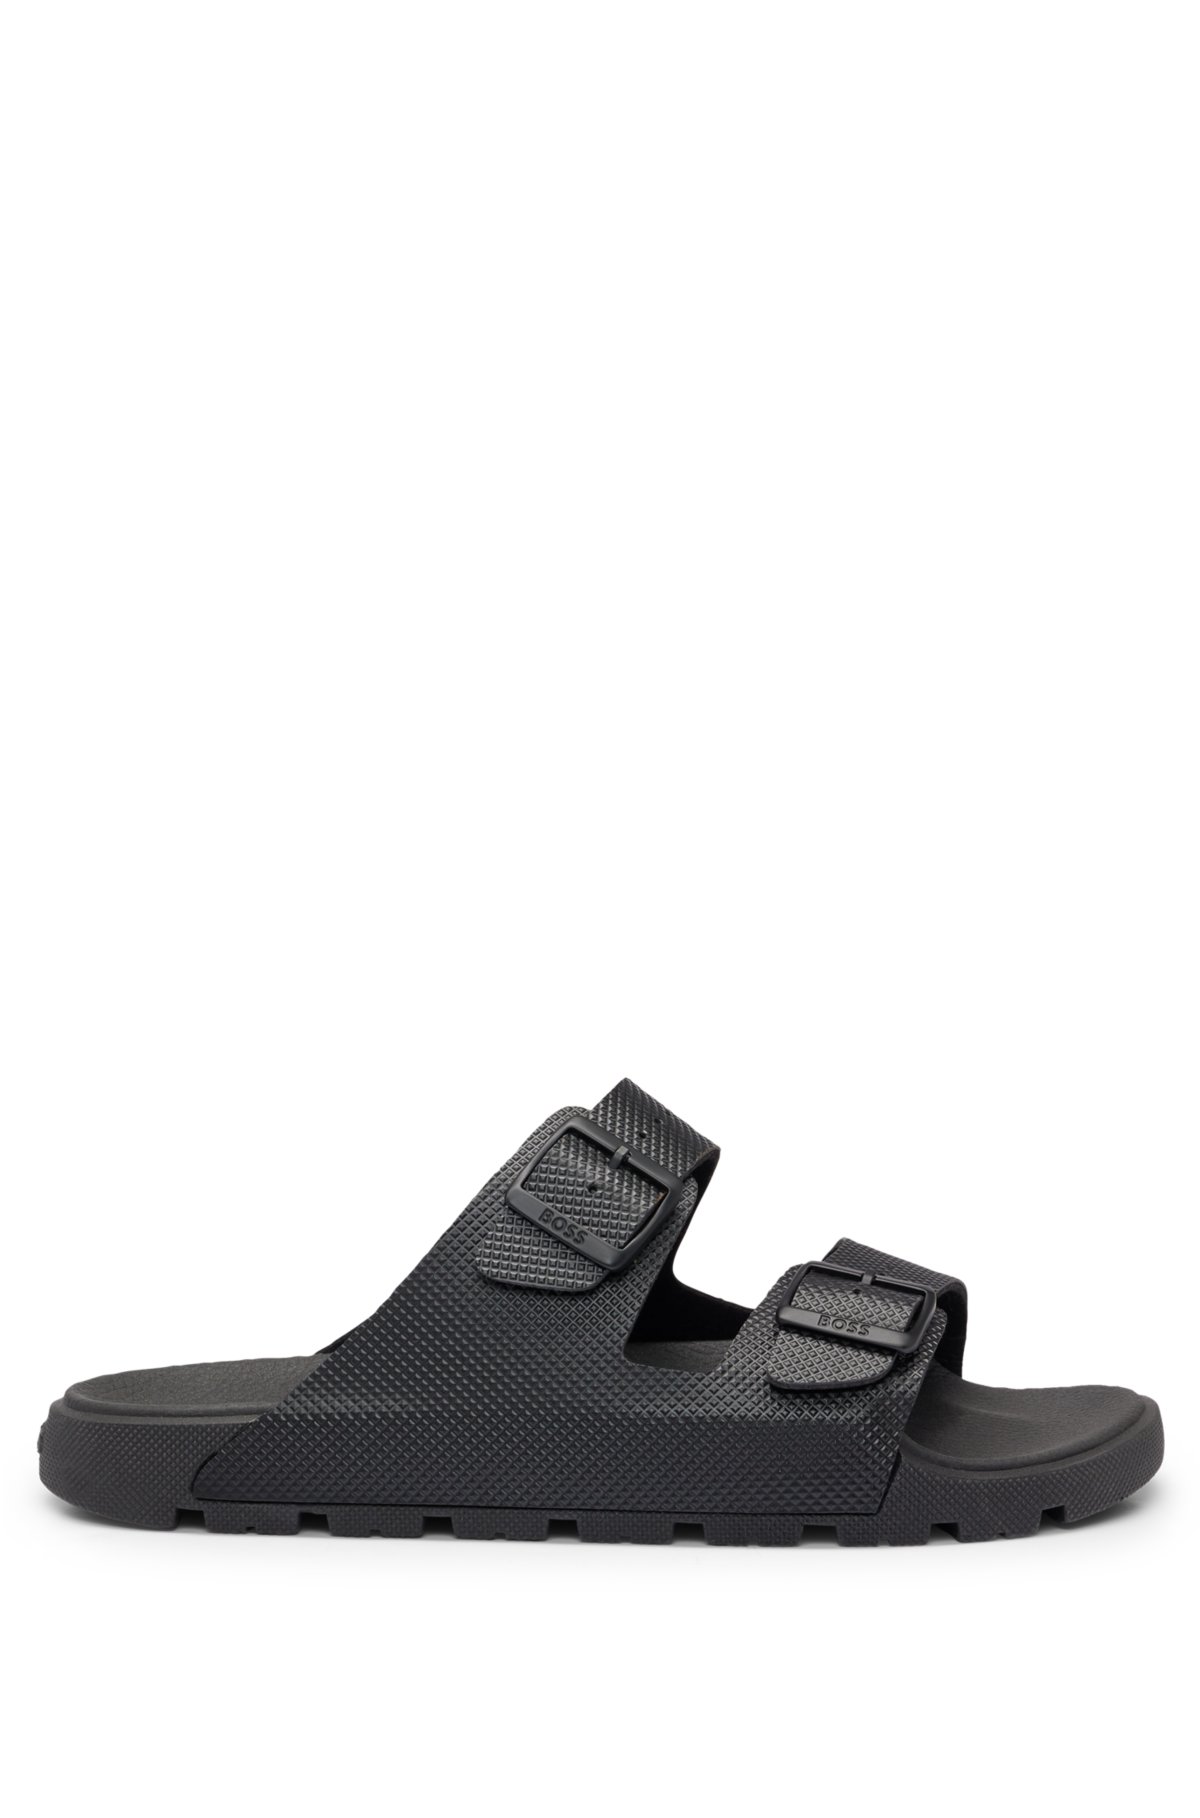 BOSS - All-gender twin-strap sandals with structured uppers